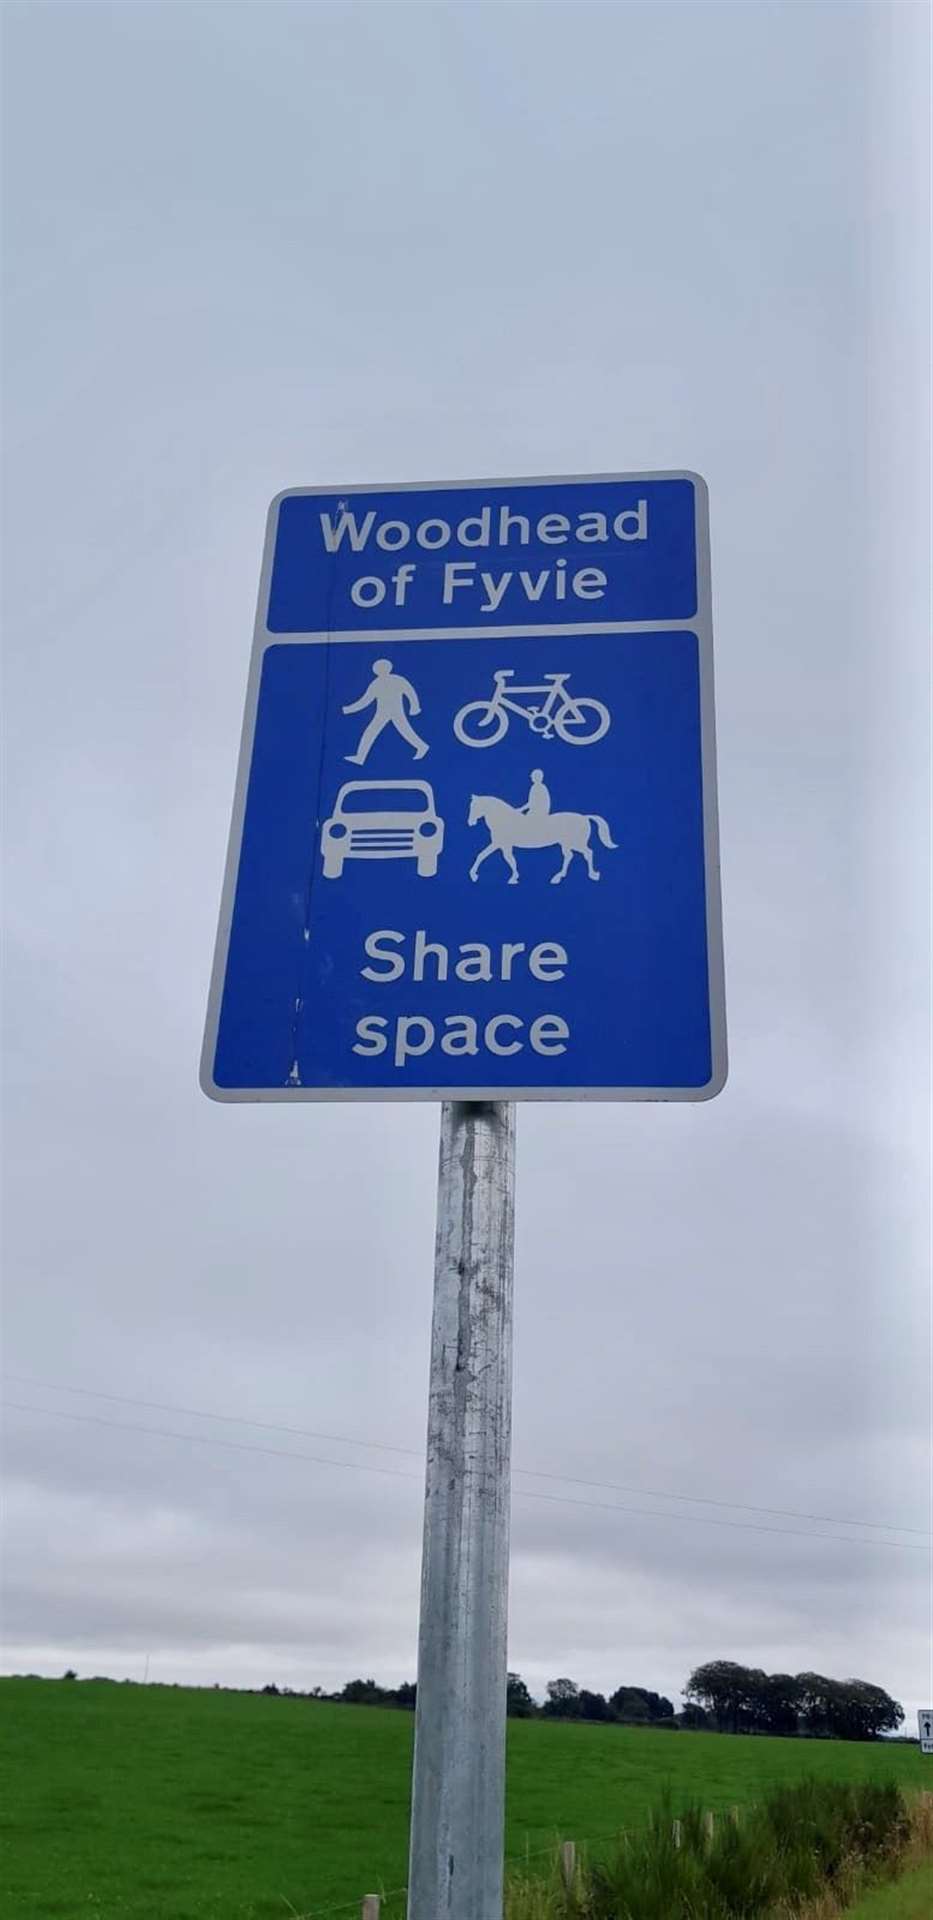 The signs indicate the shared space to drivers and cyclists